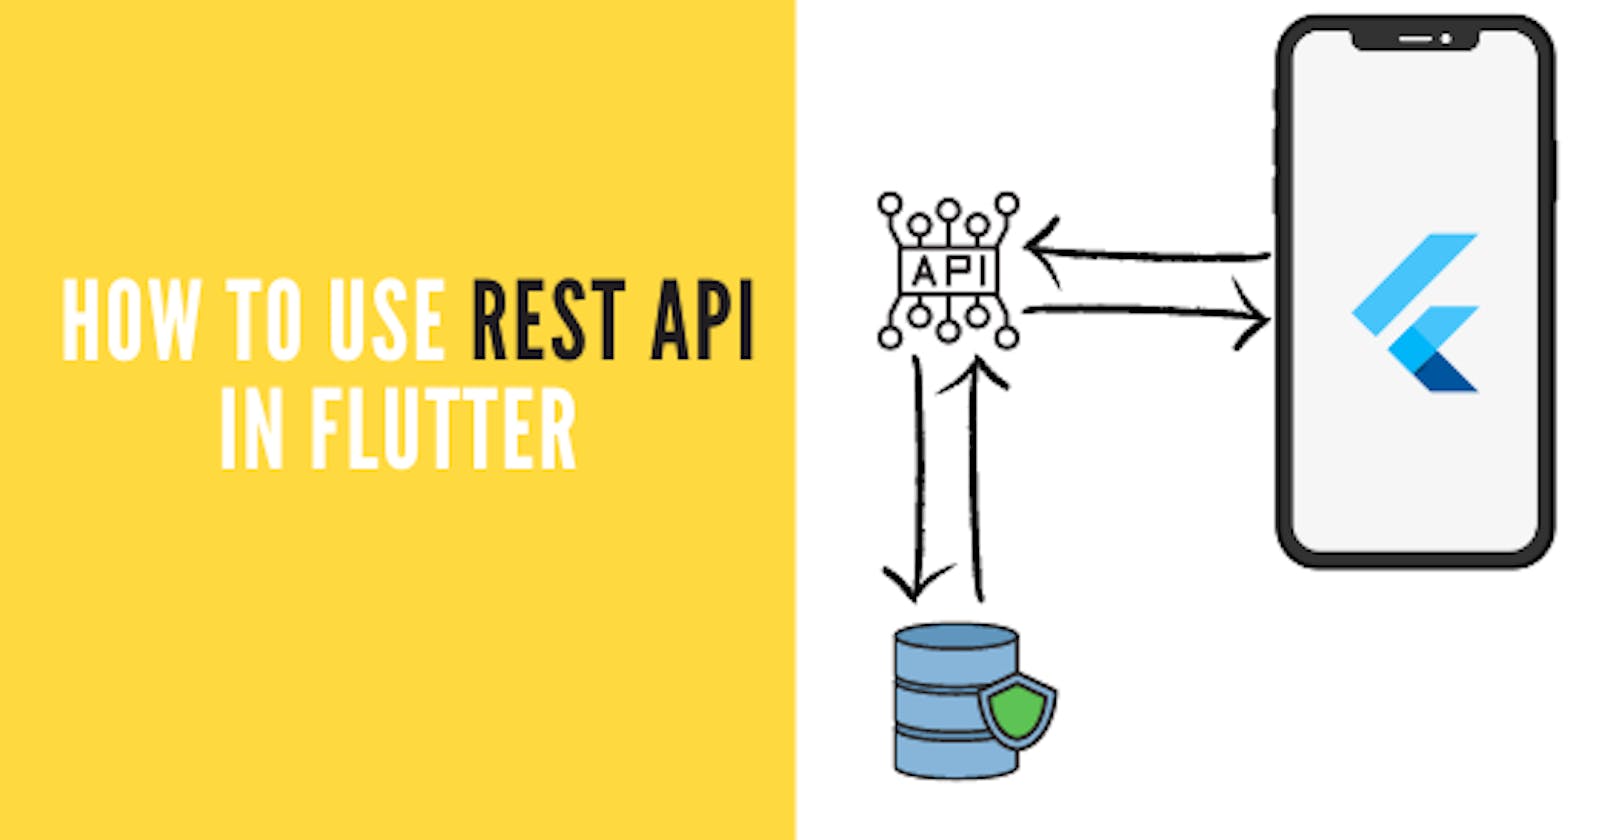 What is REST API and how to fetch data with REST API in Flutter?